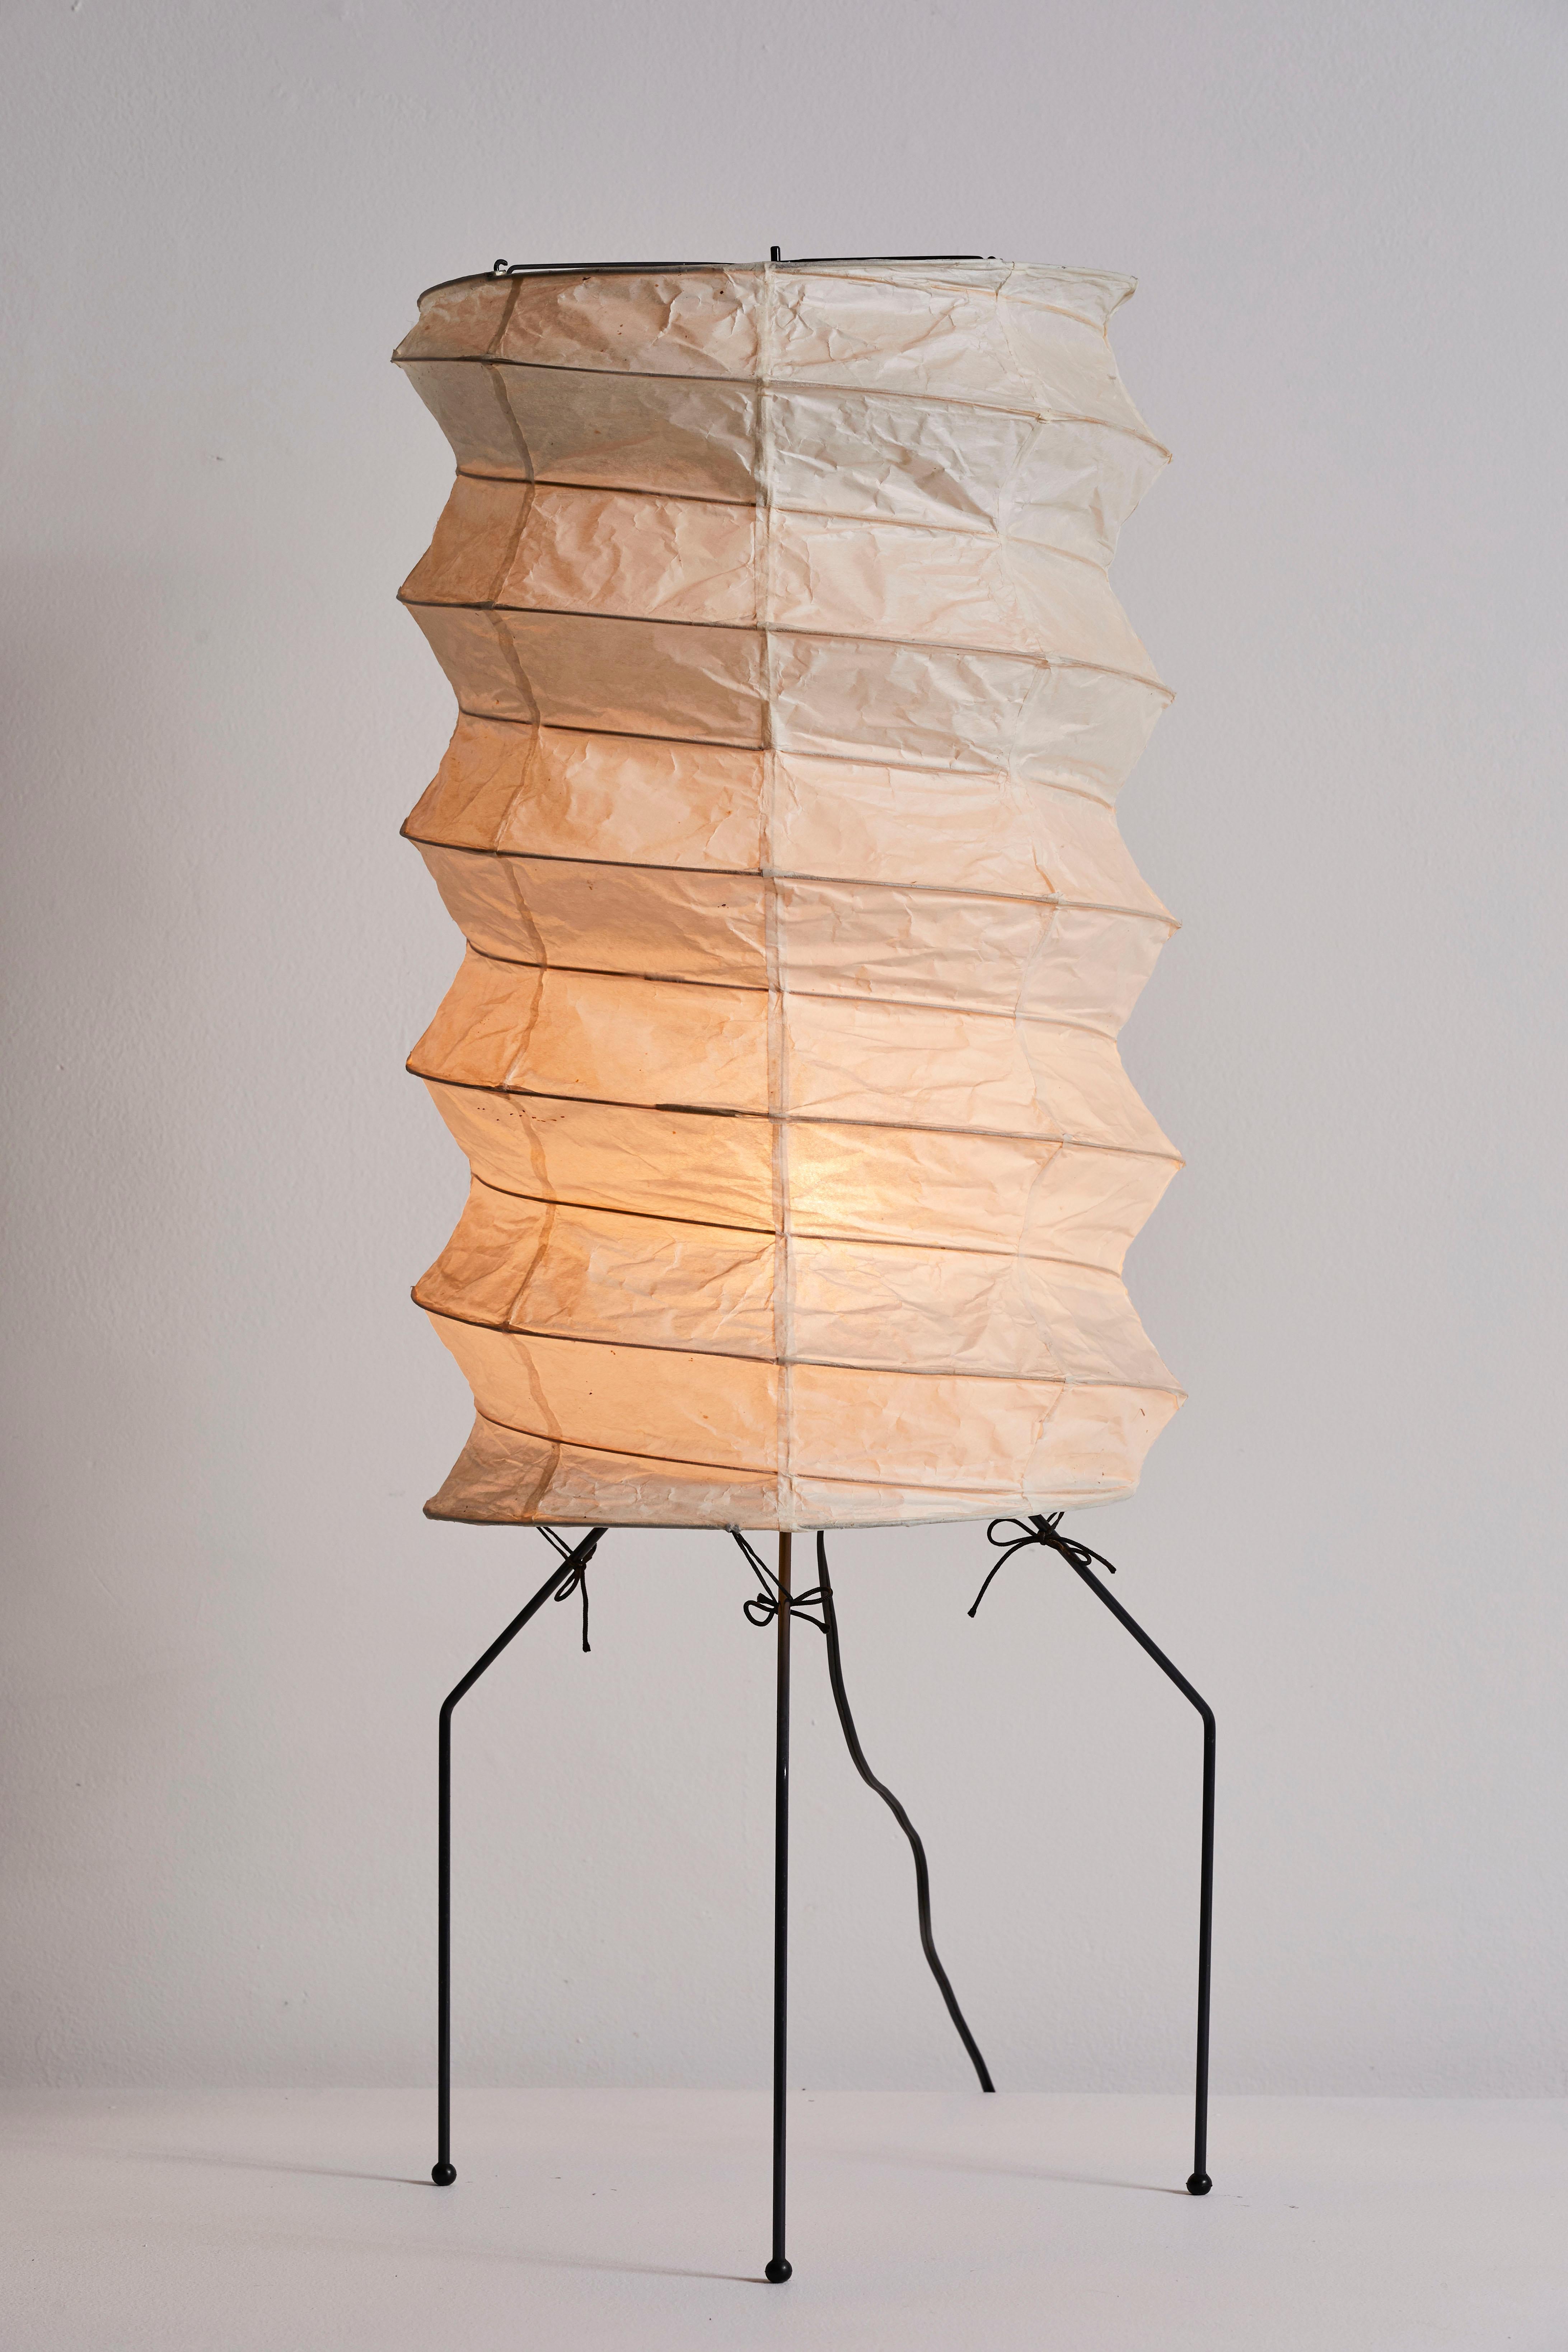 Model Number UF3-Q table/floor lamp by Isamu Noguchi for Akari. Out of model production designed and manufactured in Japan circa, 1980s. Rice paper, enameled metal. Original cord. Retains manufacturer's original stamp and Gemini Gel gallery sticker.